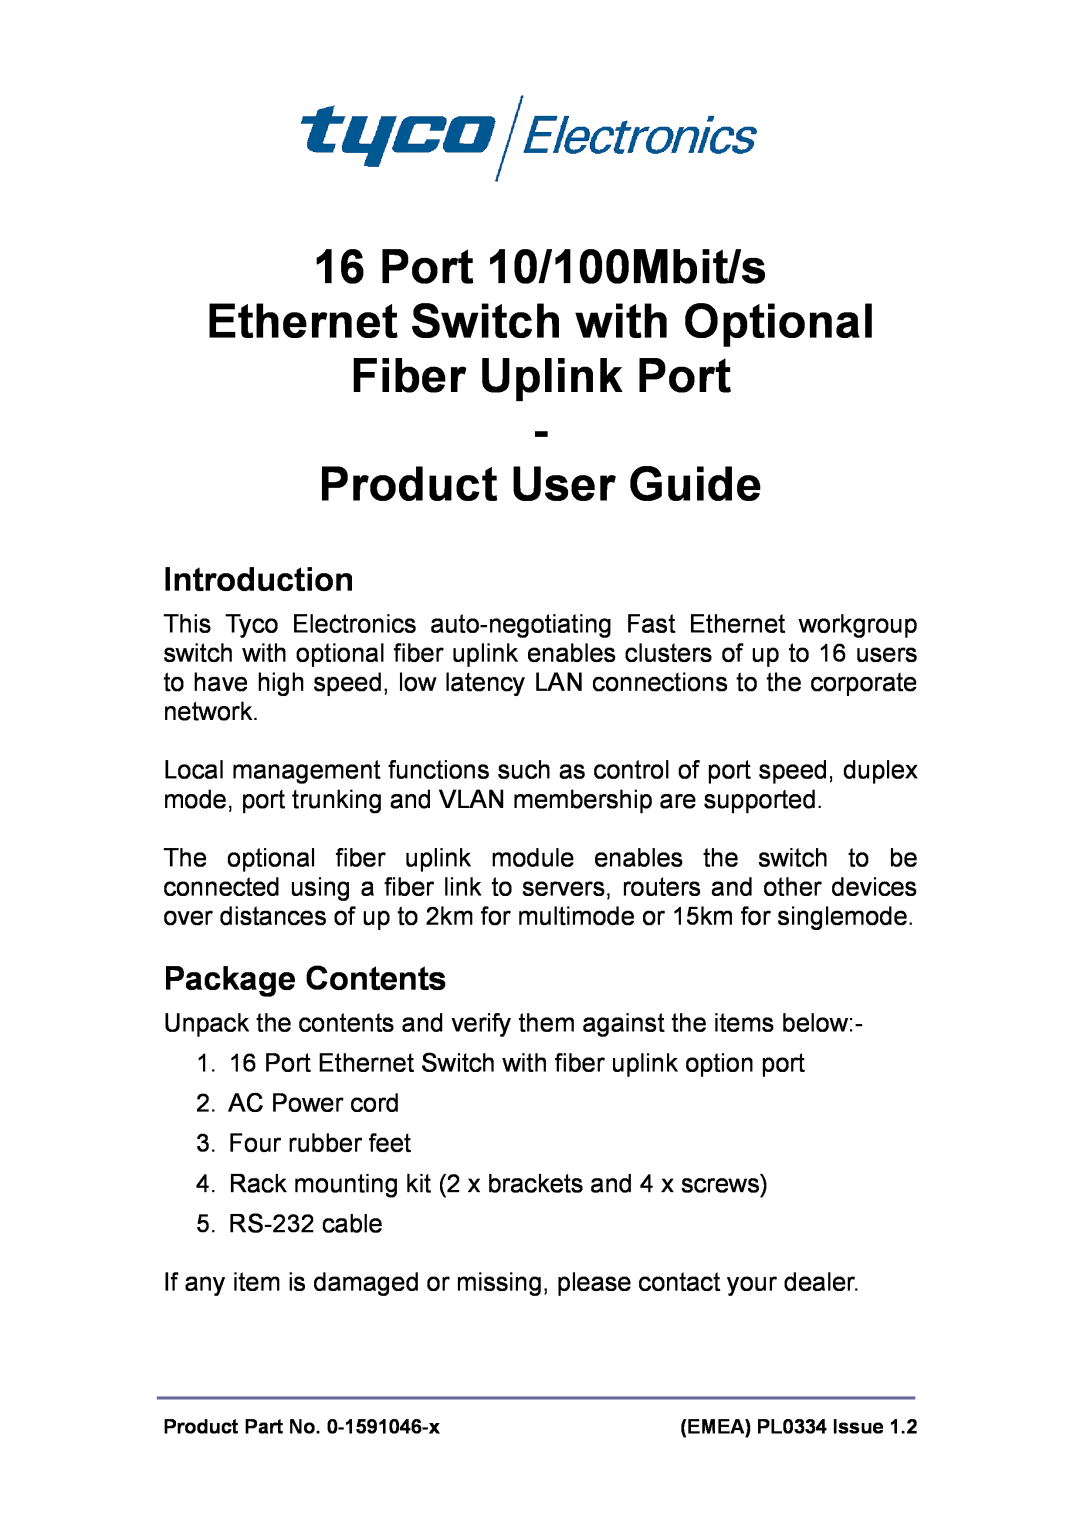 Tyco Electronics 0-1591046-X manual Introduction, Package Contents, Product User Guide 